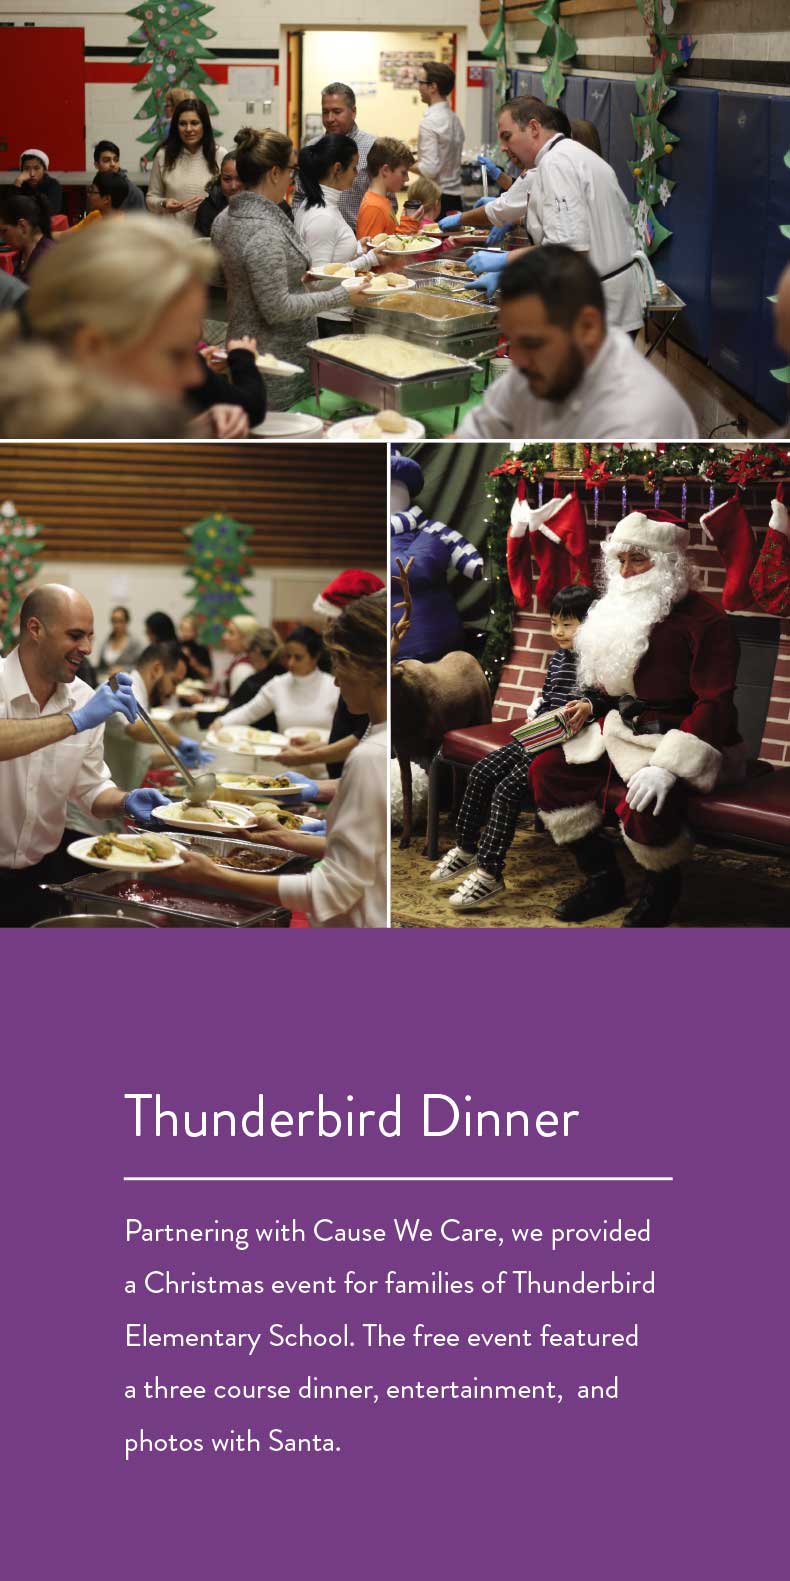 Partnering with Cause We Care, we provided a Christmas event for families of Thunderbird Elementary School. The free event featured a three course dinner, entertainment,  and photos with Santa.